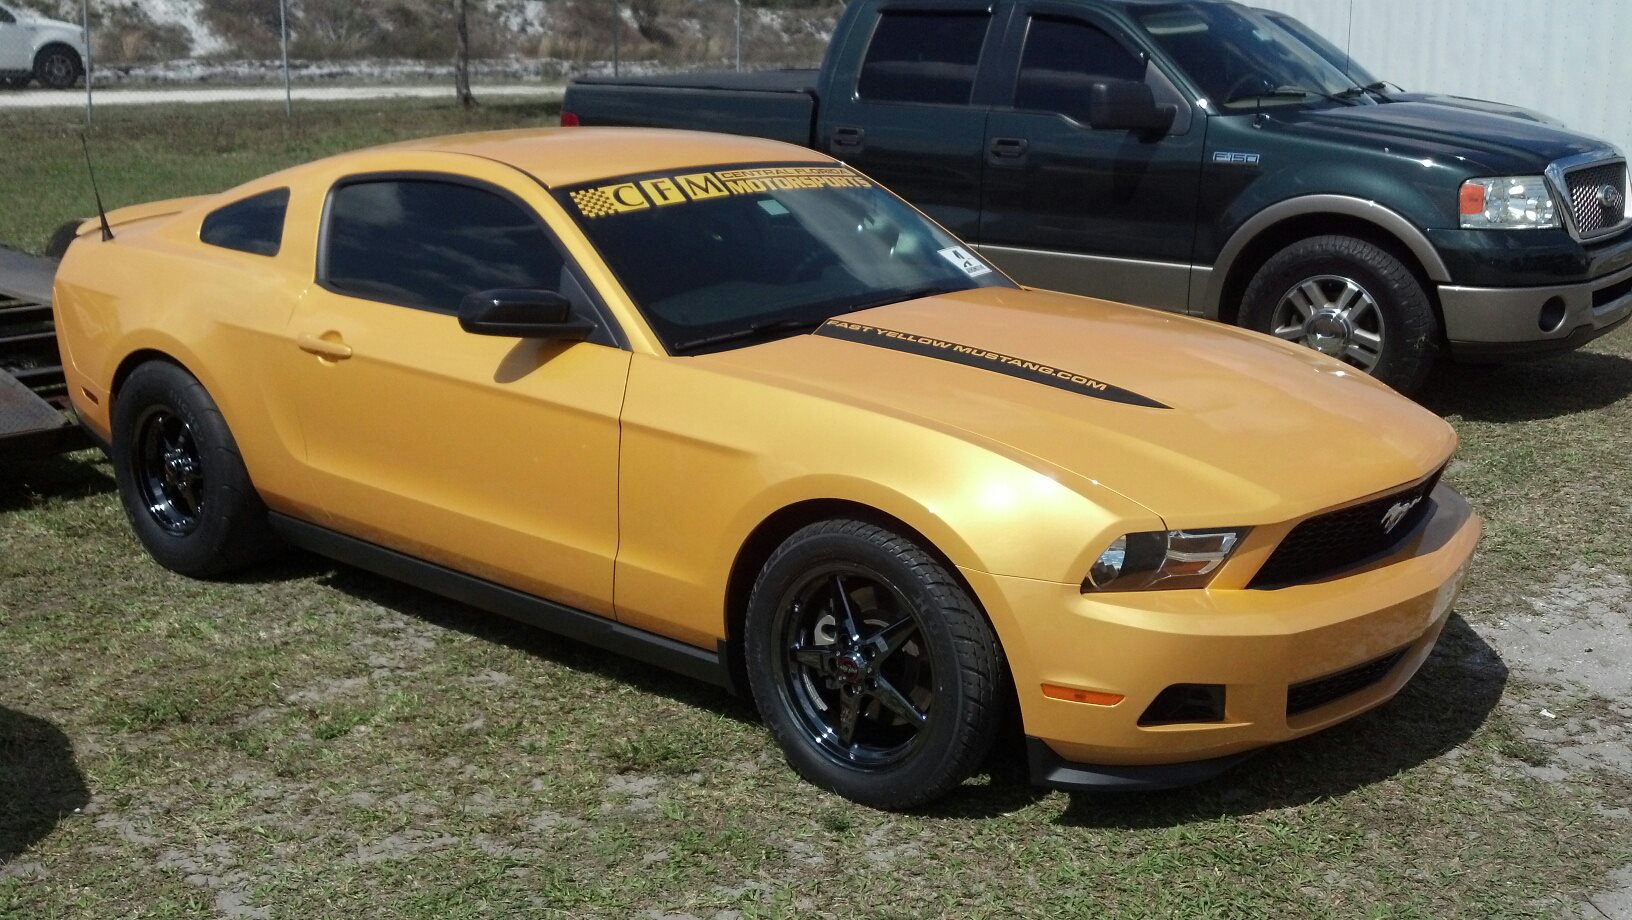 2011 Ford mustang v6 1 4 mile times #4